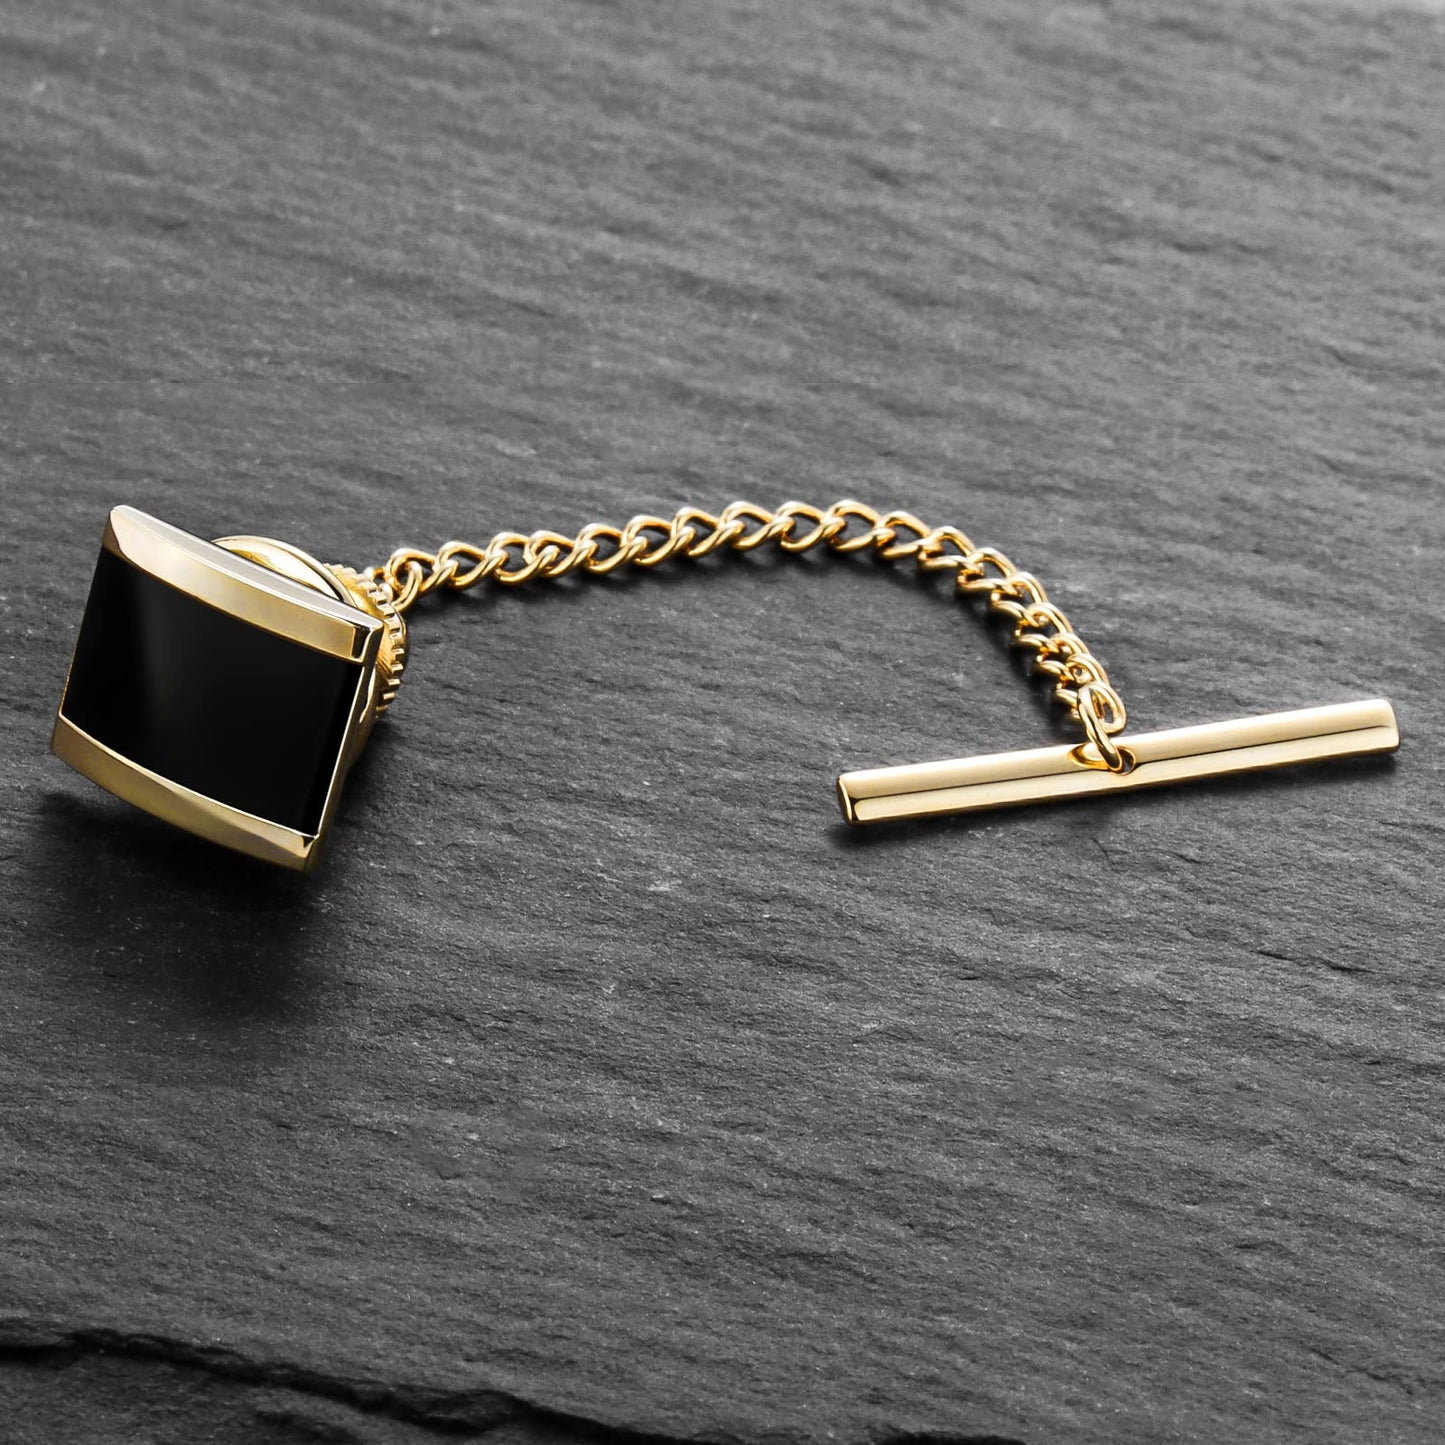 Silver tie tack made by stainless steel material